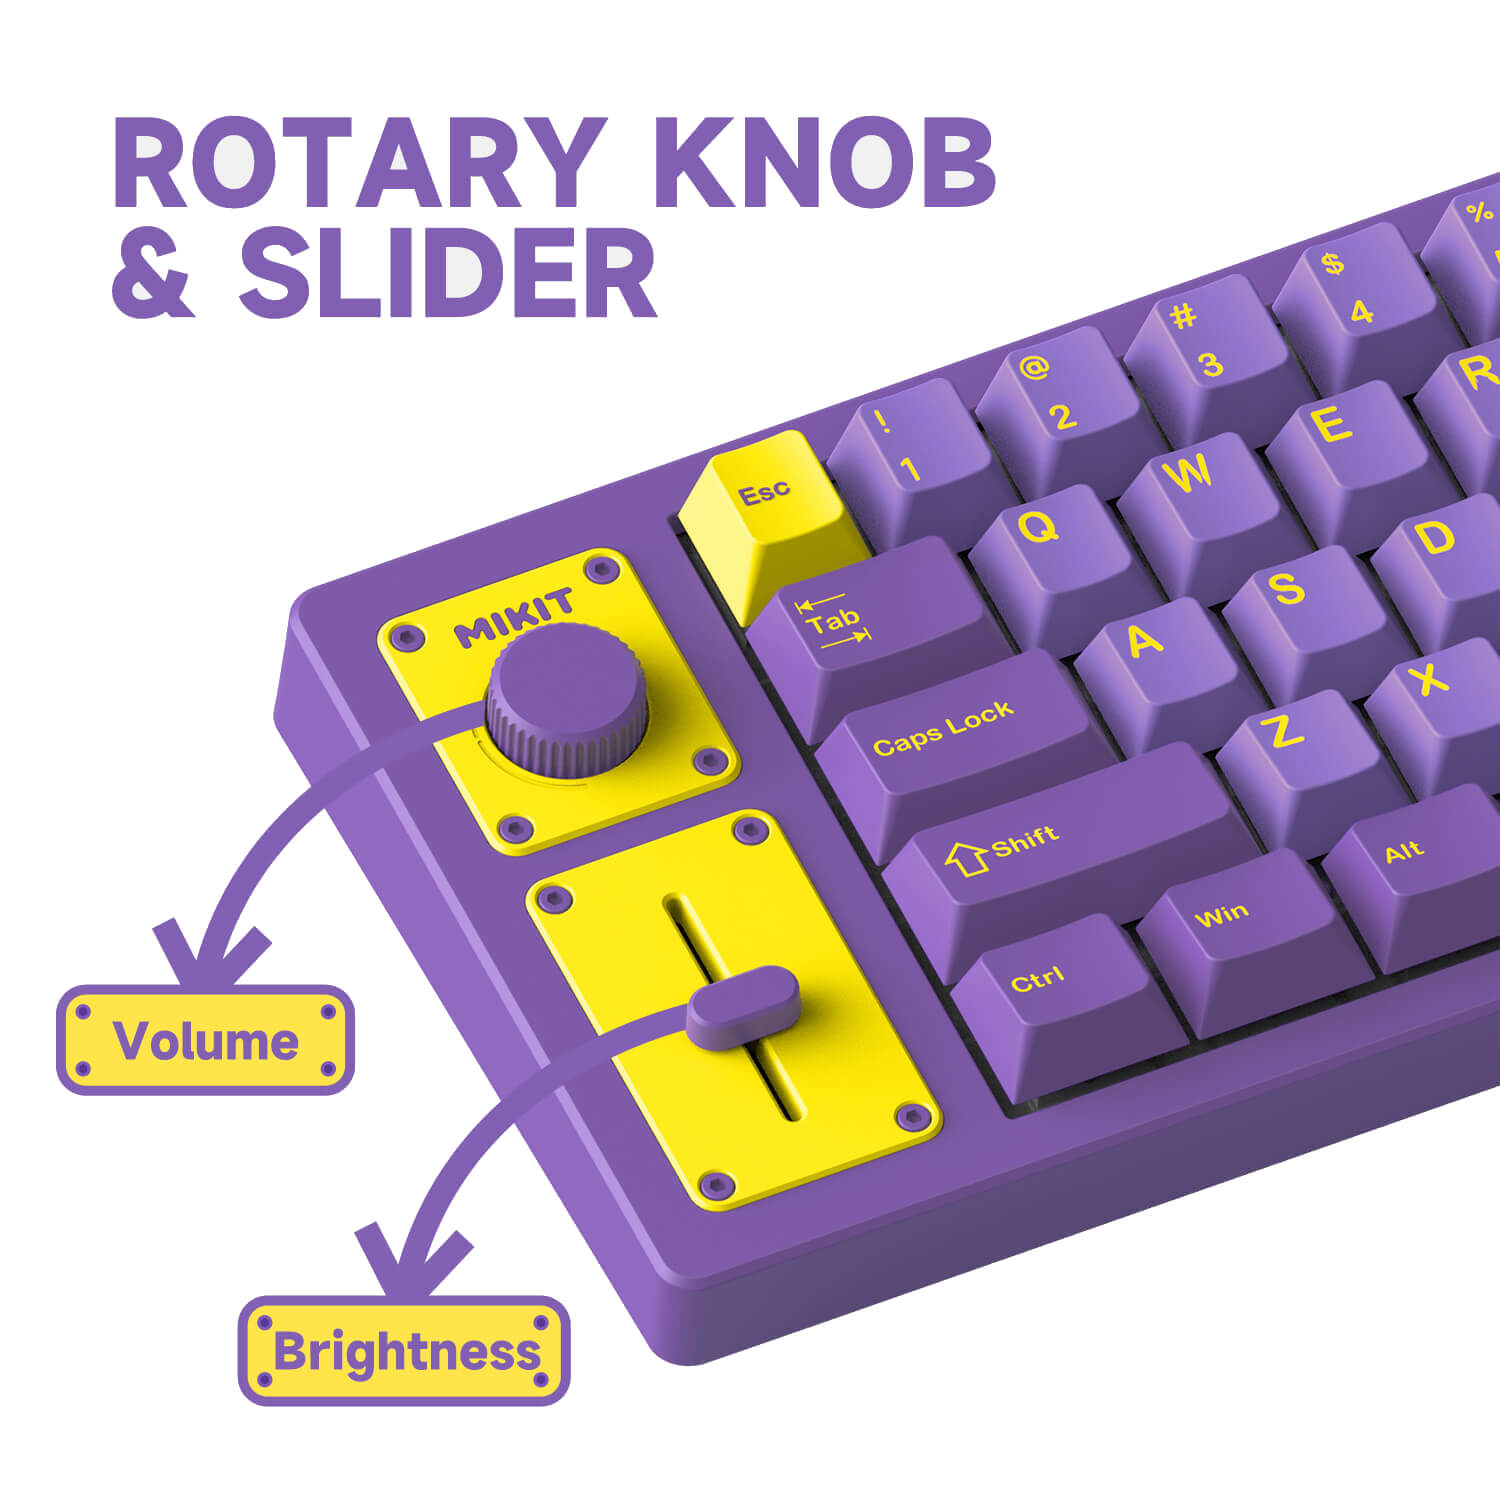 A premium keyboard choice for users seeking a blend of style, functionality, and durability